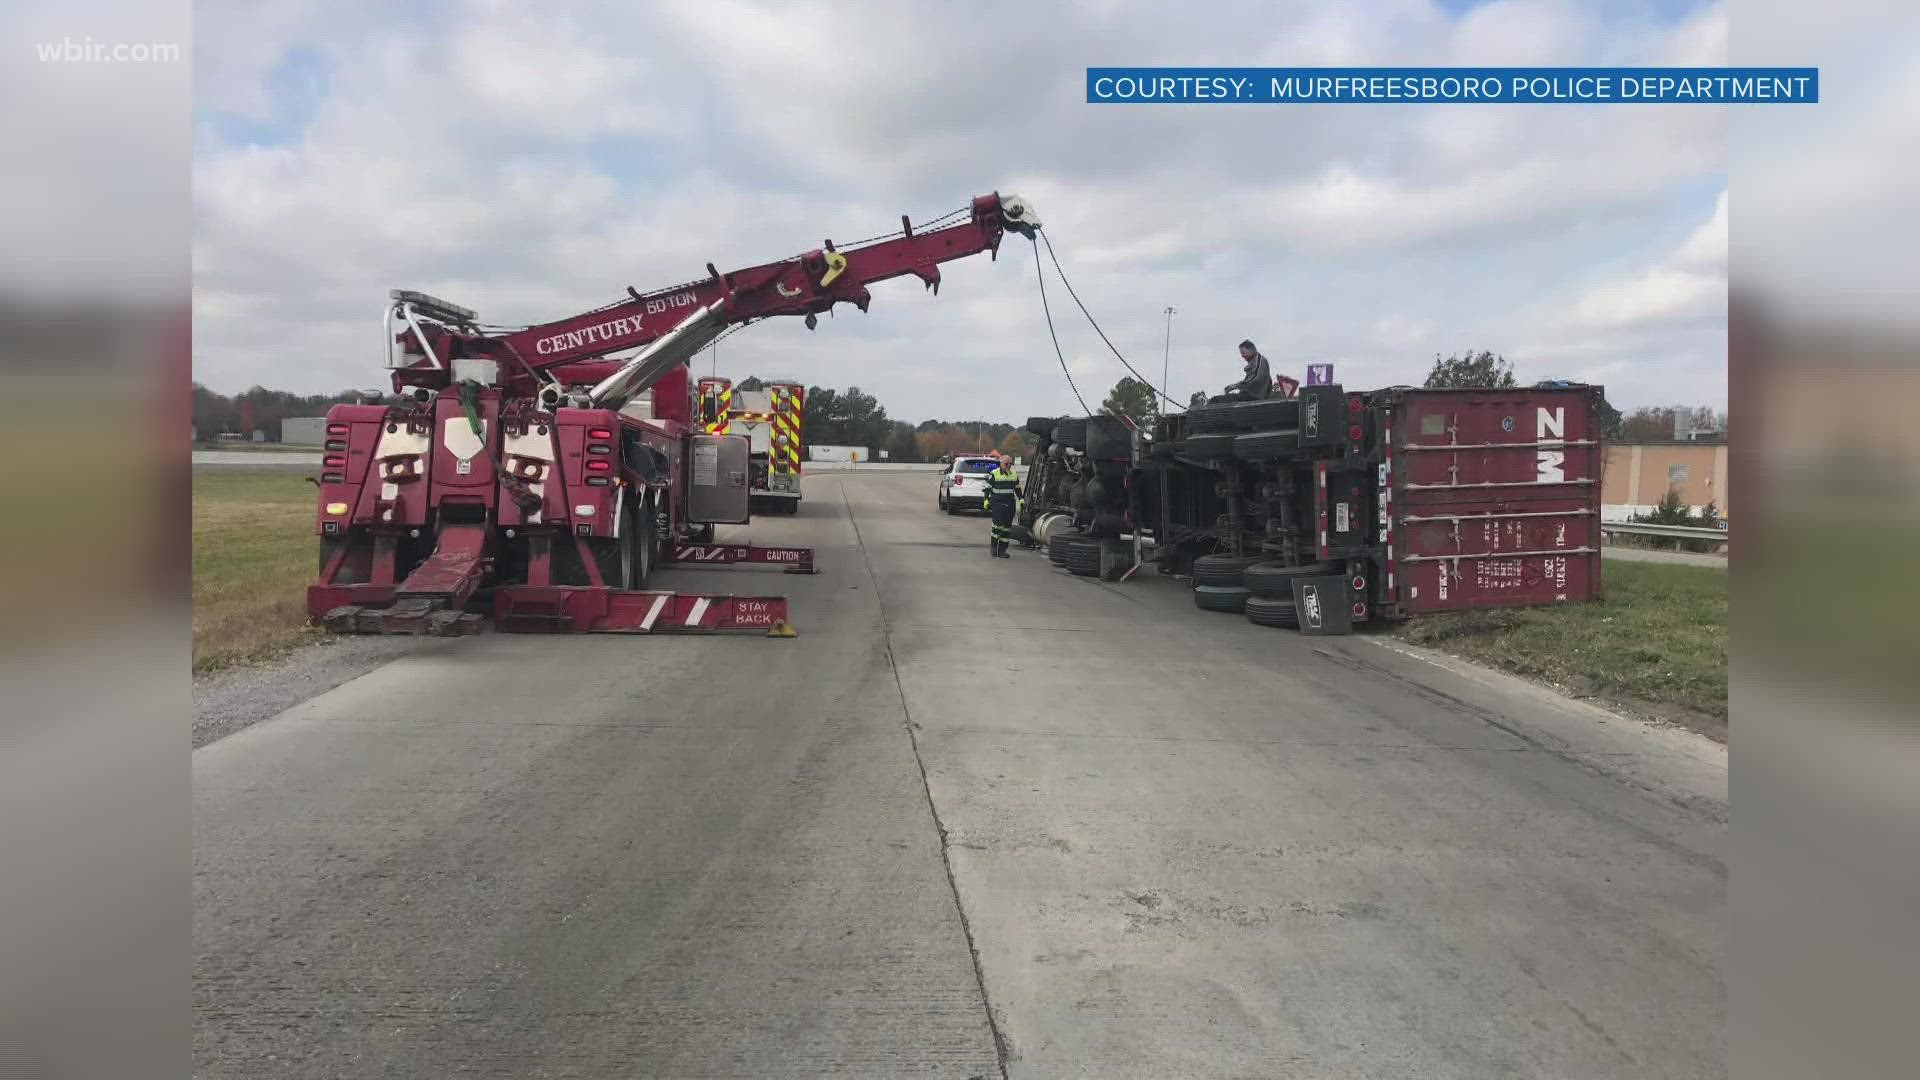 The truck was filled with $400,000 worth of Jack Daniel's whiskey and overturned while the driver was turning left onto the I-24 on-ramp.